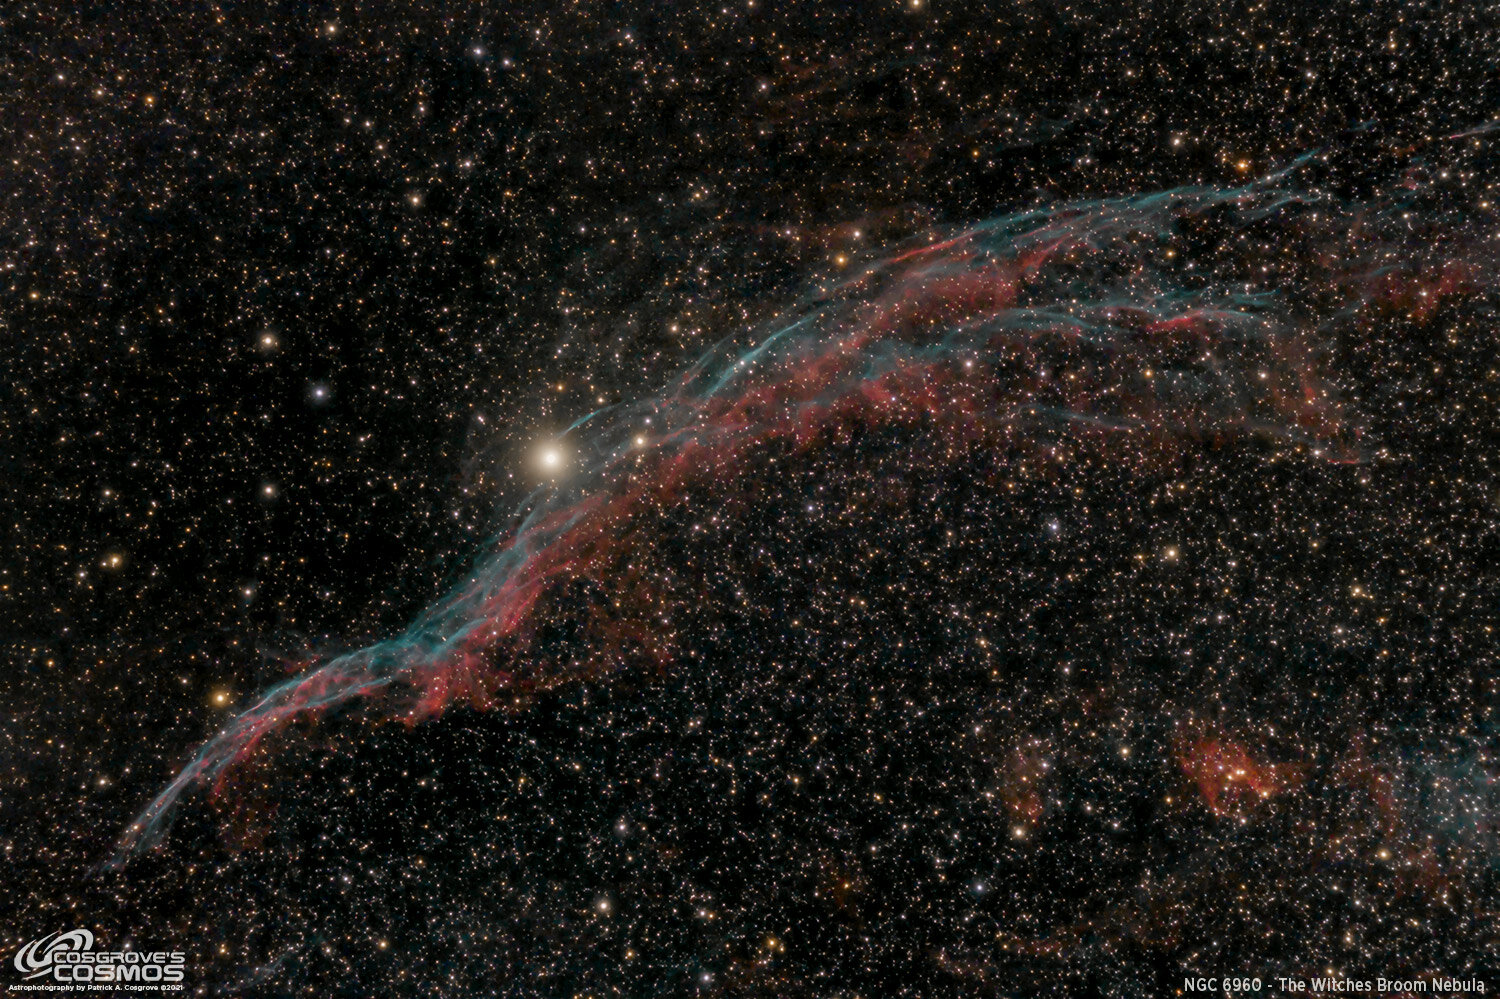 NGC 6960 - The Witches Broom Nebula — Cosgrove's Cosmos